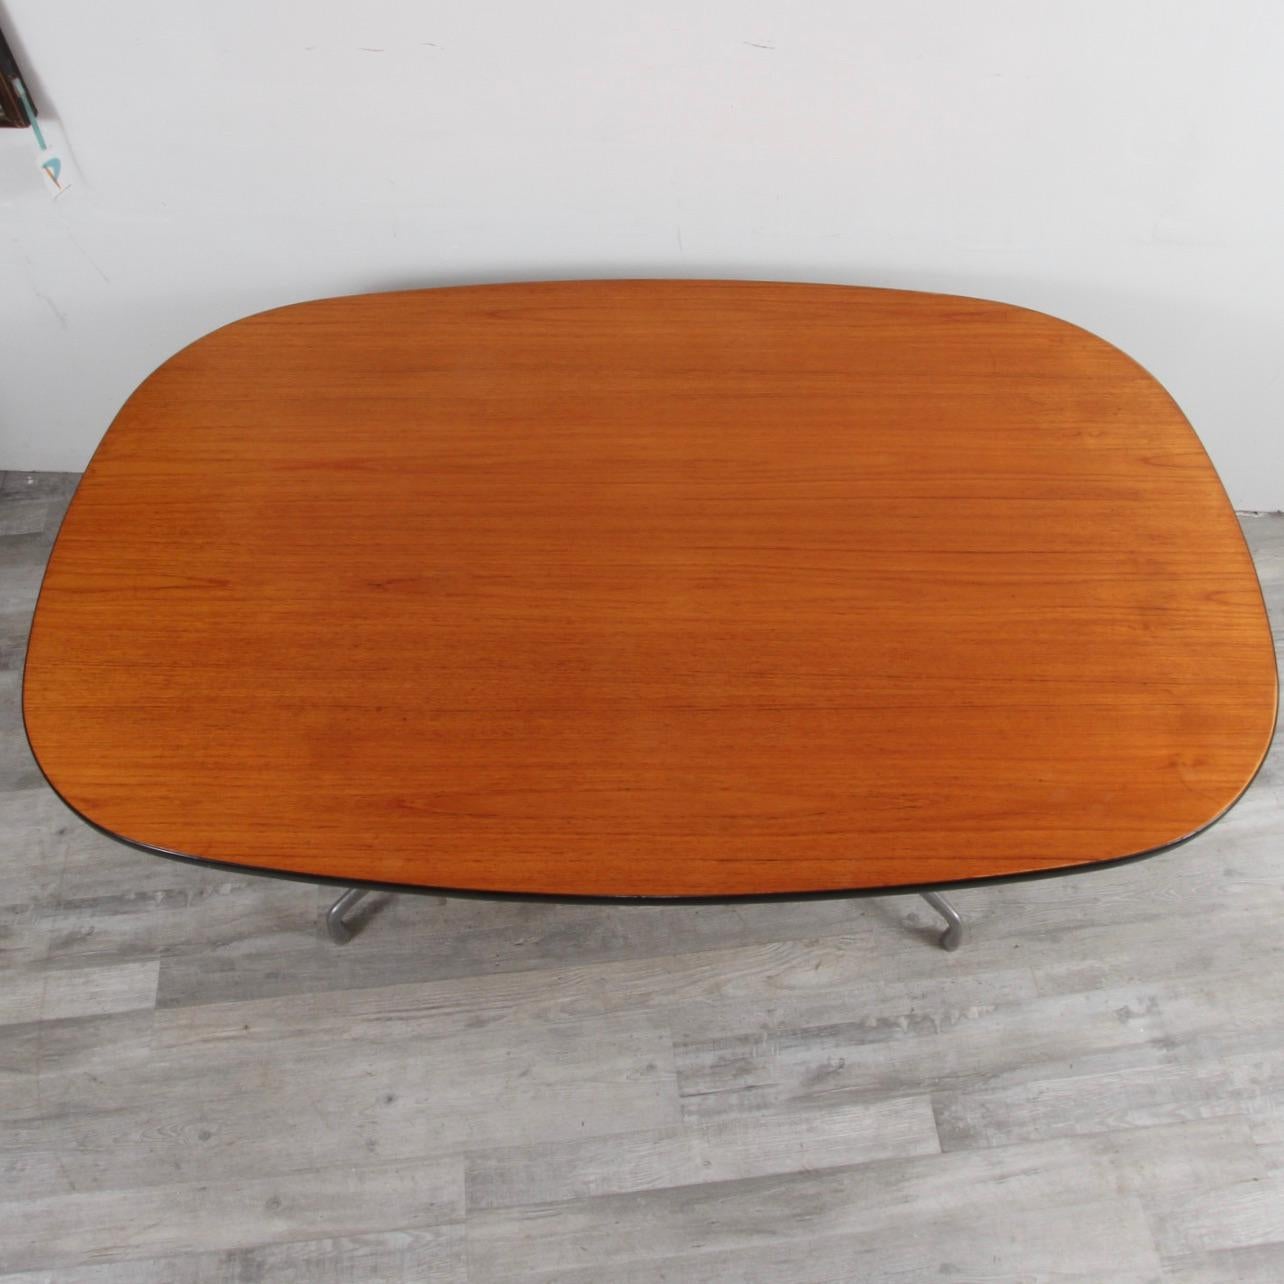 Herman Miller Eames Dining Table In Good Condition For Sale In New London, CT